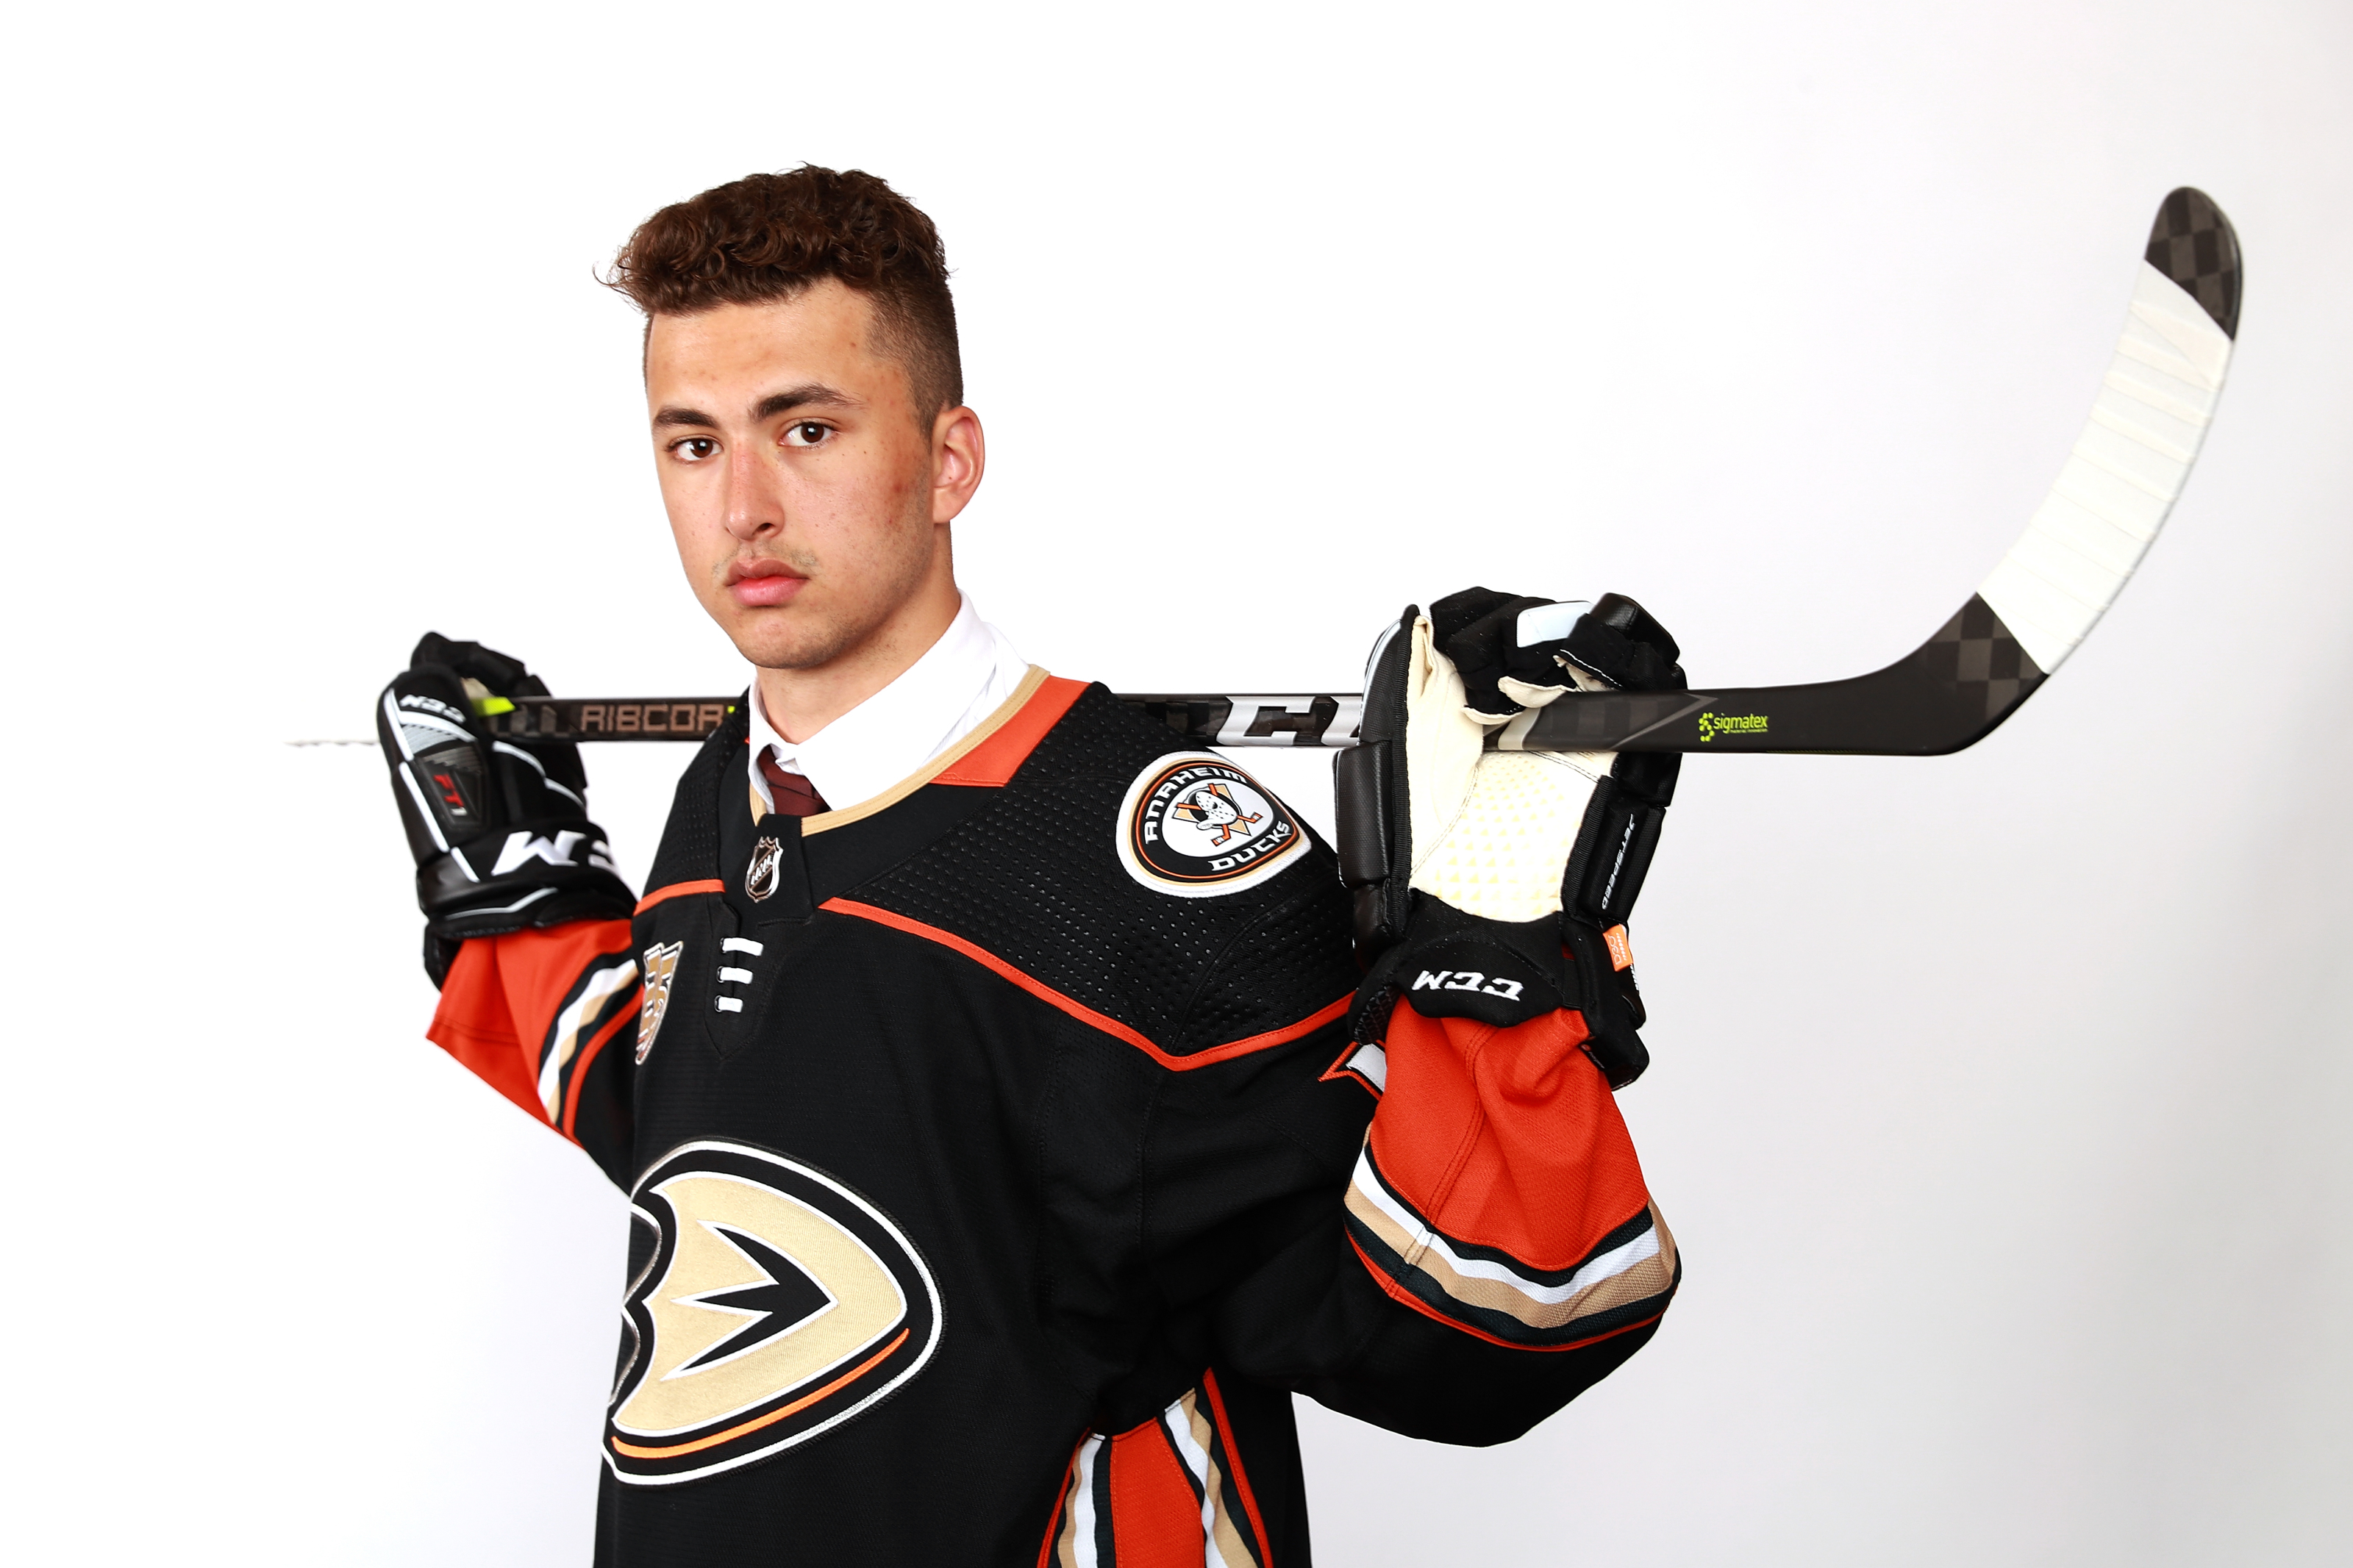 Anaheim Ducks: Is the 10th Overall Pick on the Block?